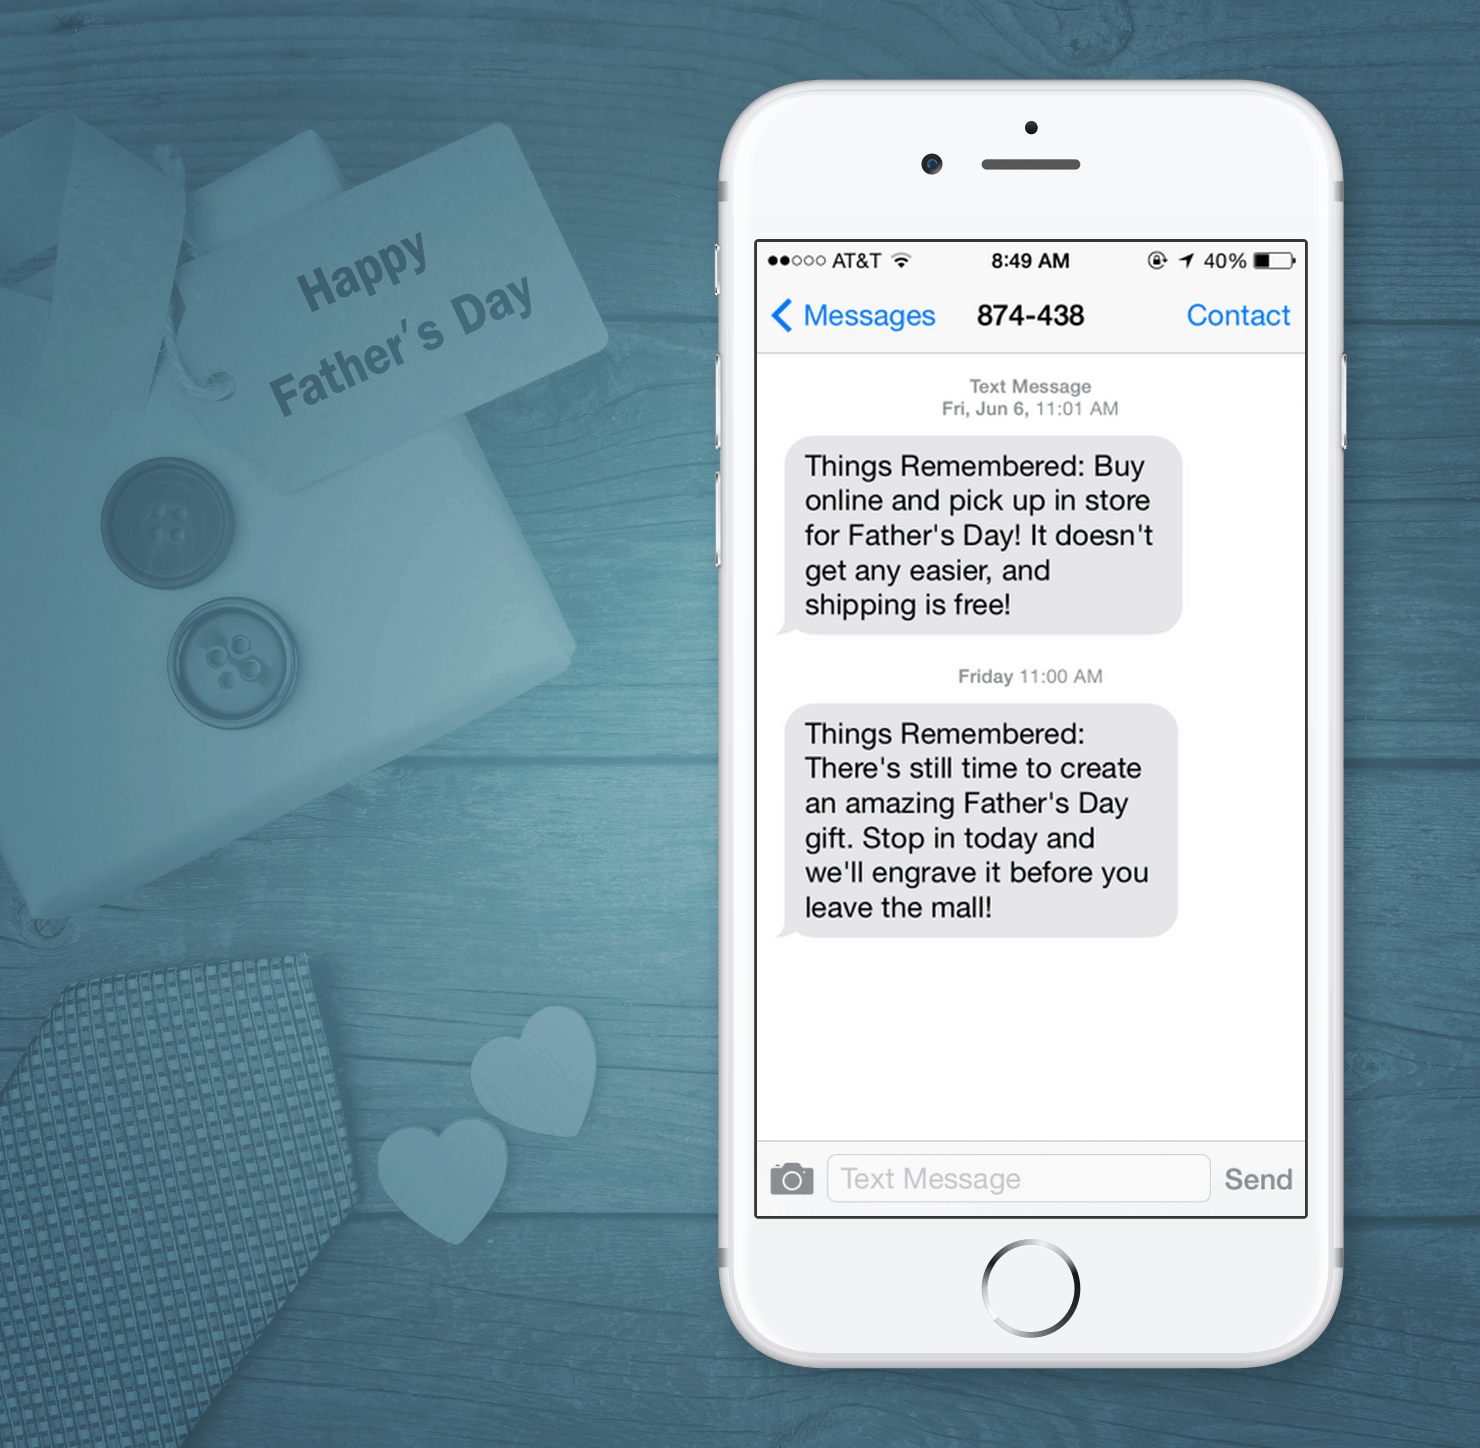 SMS Marketing Examples from Things Remembered for Fathers Day